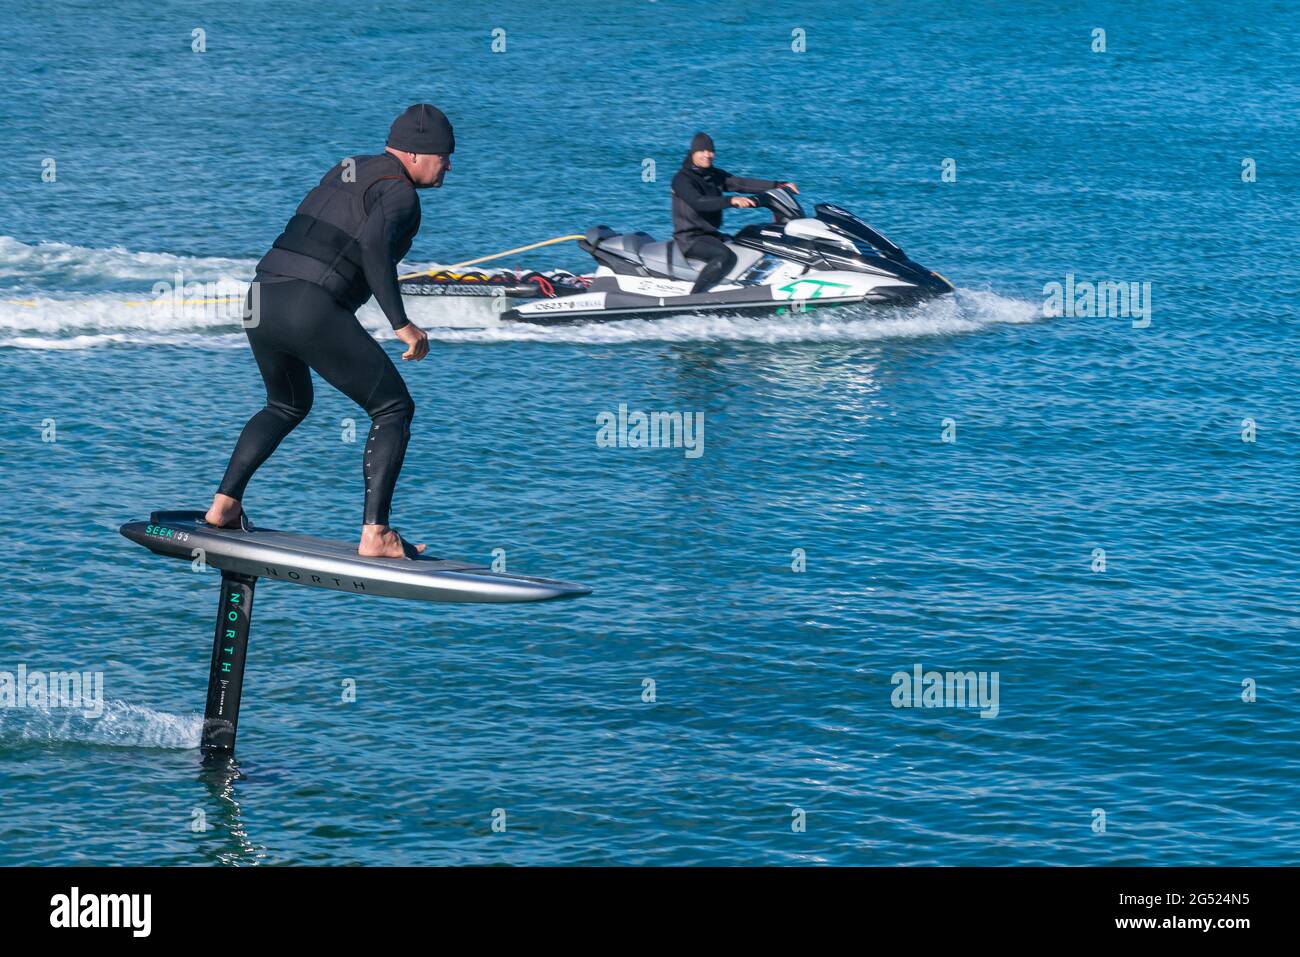 Auckland New Zealand - June 17 2021;Foil board being towed behind jet-ski on Auckland harbor Stanley Bay Stock Photo